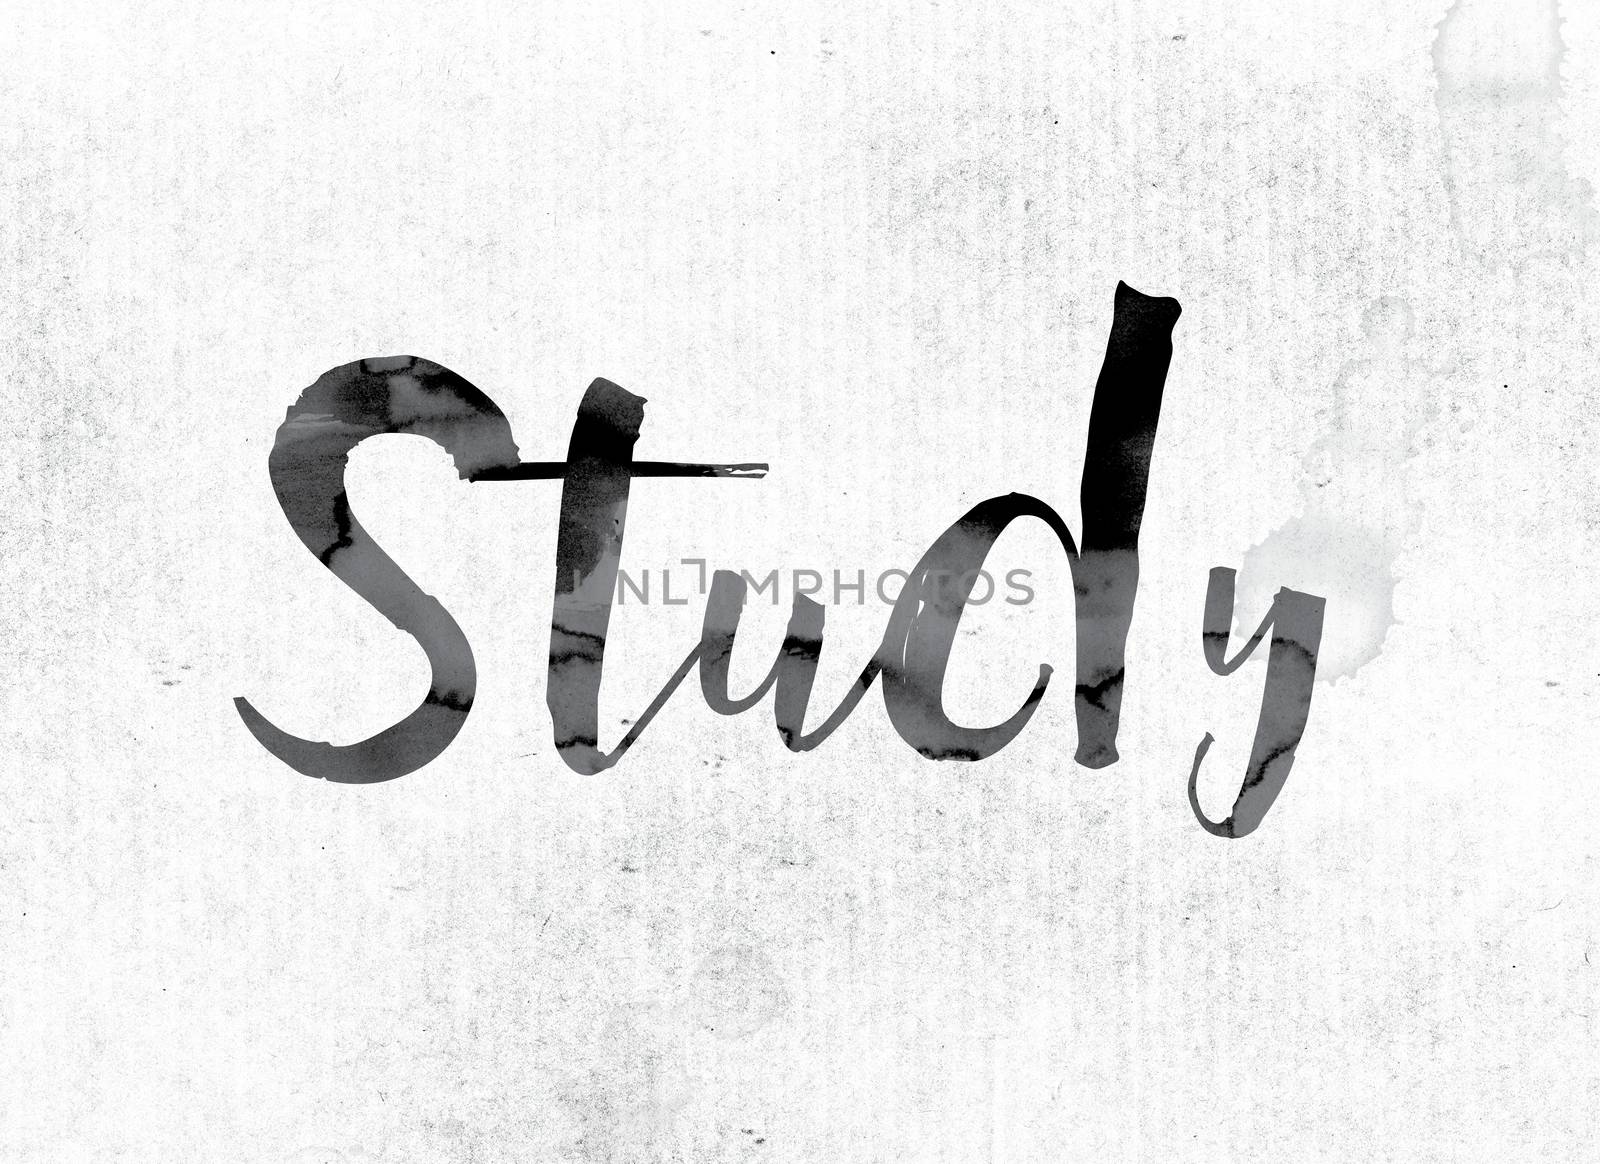 The word "Study" concept and theme painted in watercolor ink on a white paper.